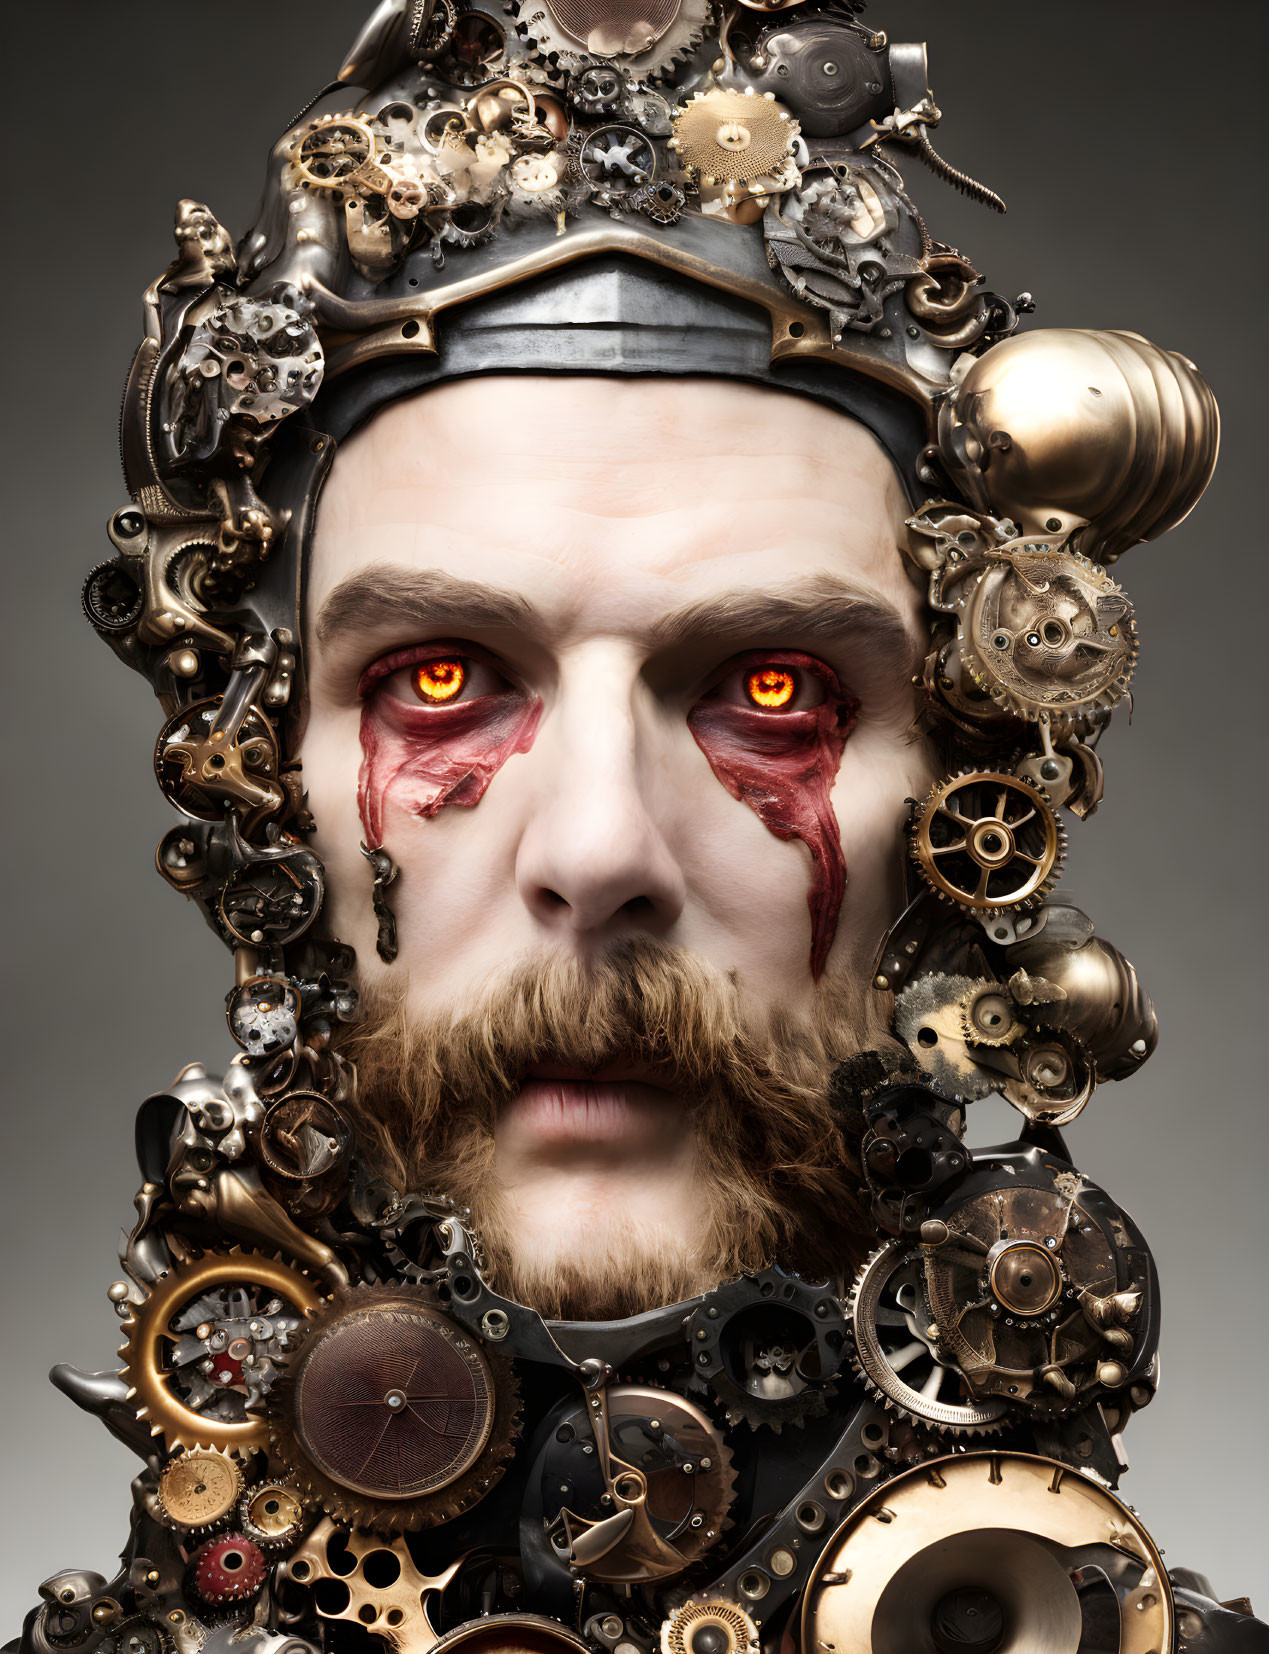 Steampunk-style headgear with glowing red eyes and mechanical parts